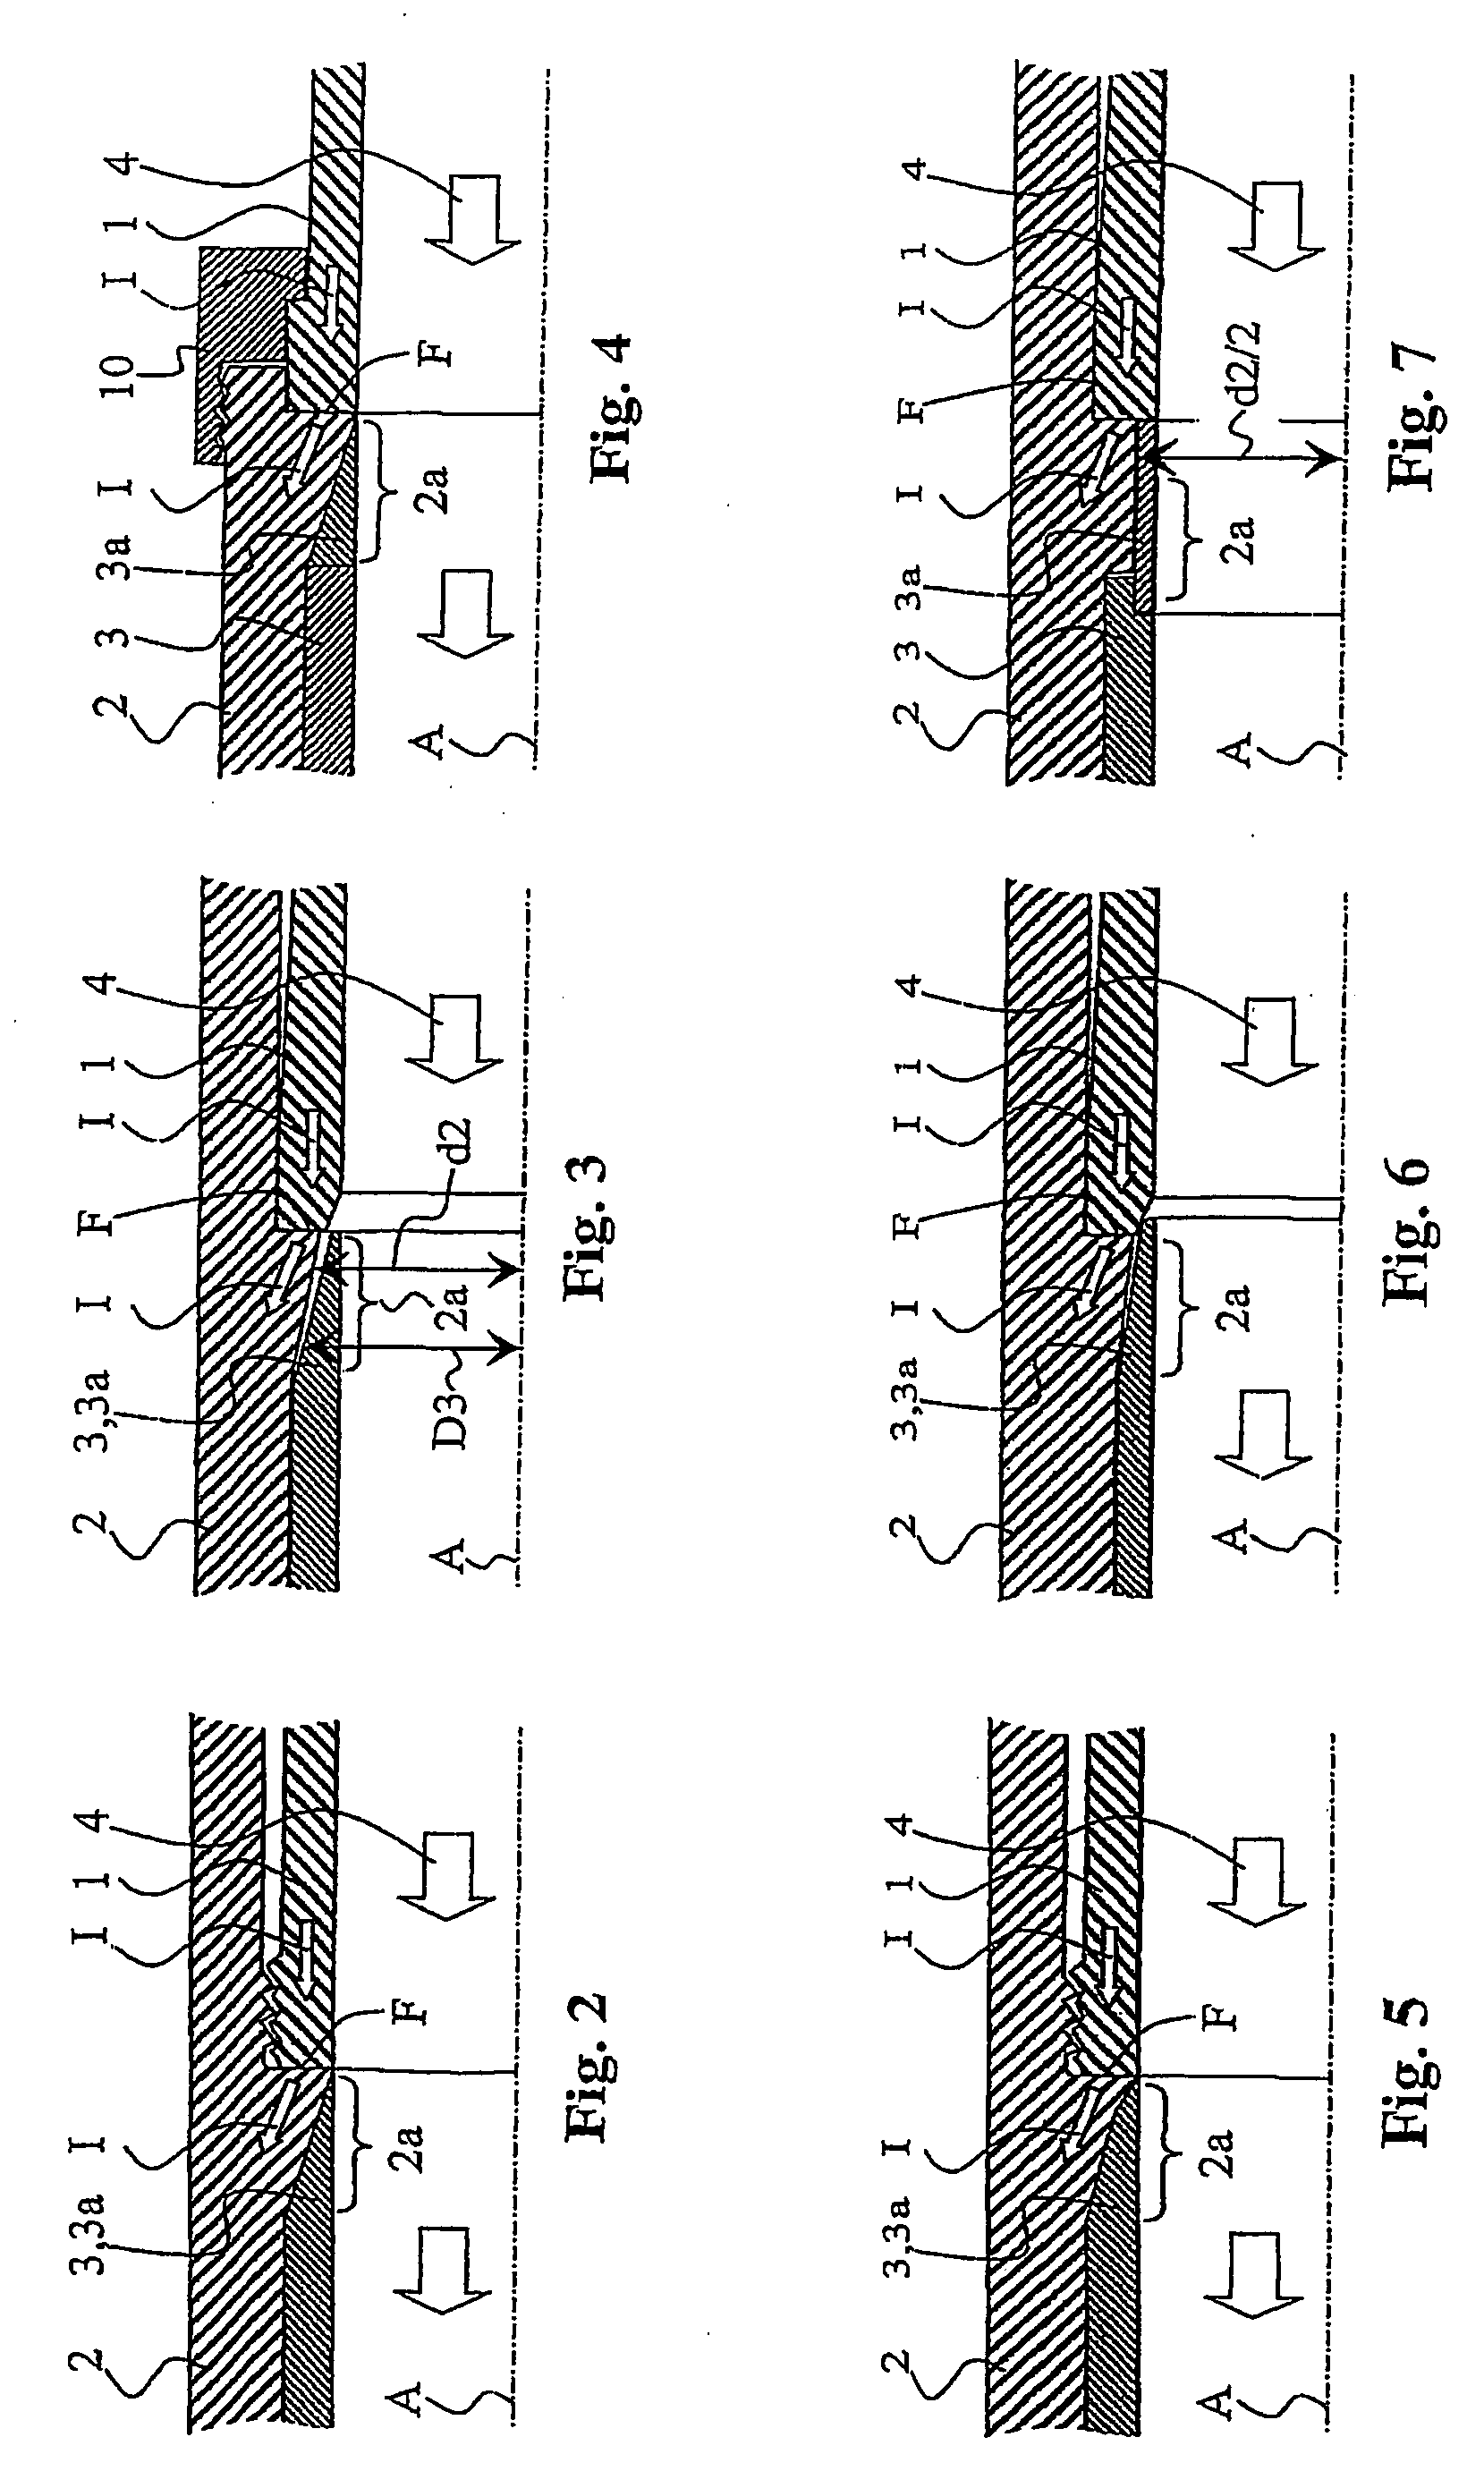 Heavy-duty circuit breaker with erosion-resistant short-circuit current routing